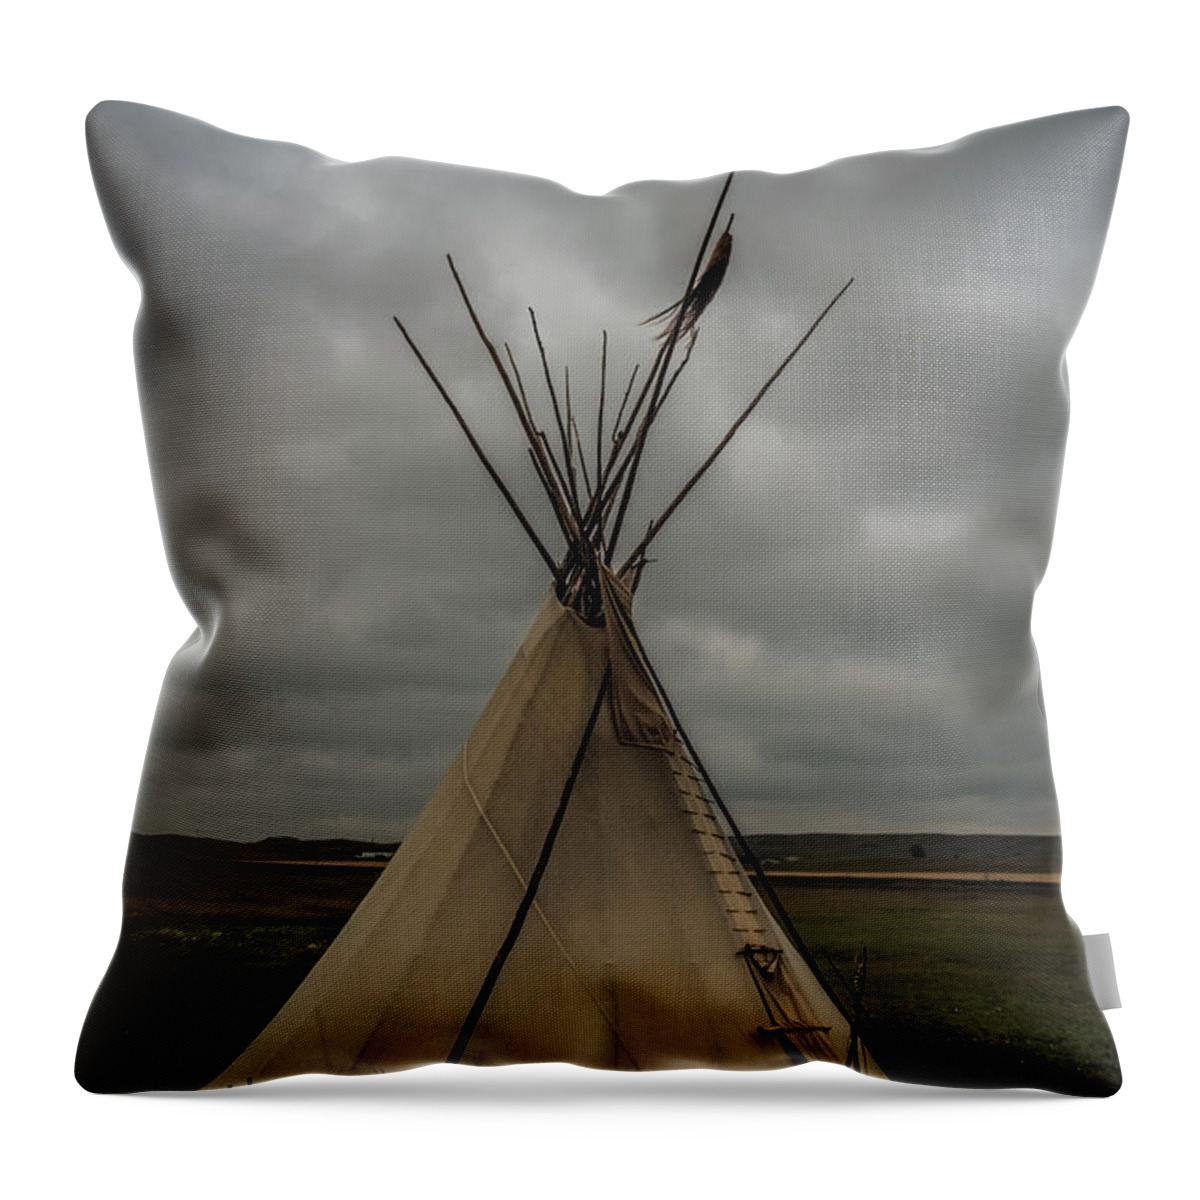 Tepee Throw Pillow featuring the photograph Tepee by Paul Freidlund